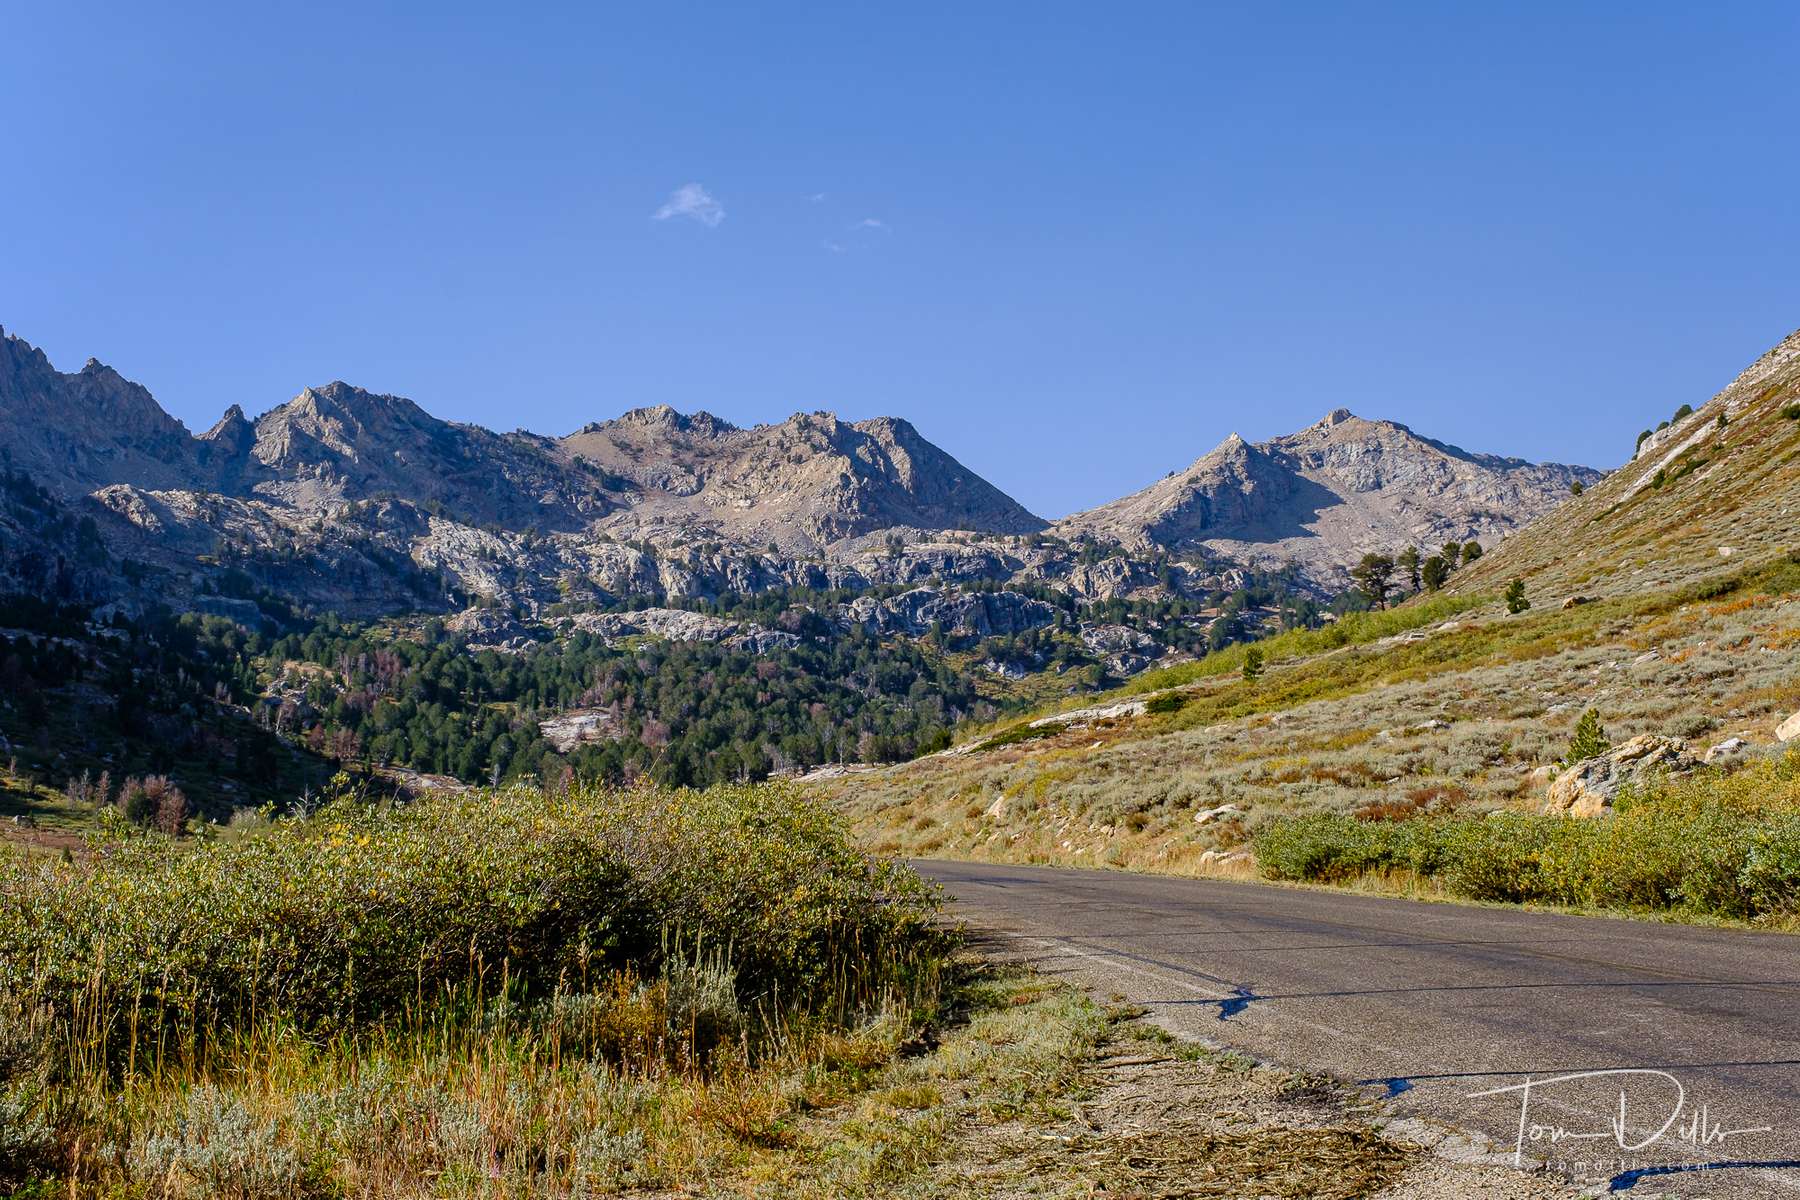 Lamoille Canyon Scenic Byway, part of the Humboldt-Toiyabe National Forest in eastern Nevada near Elko